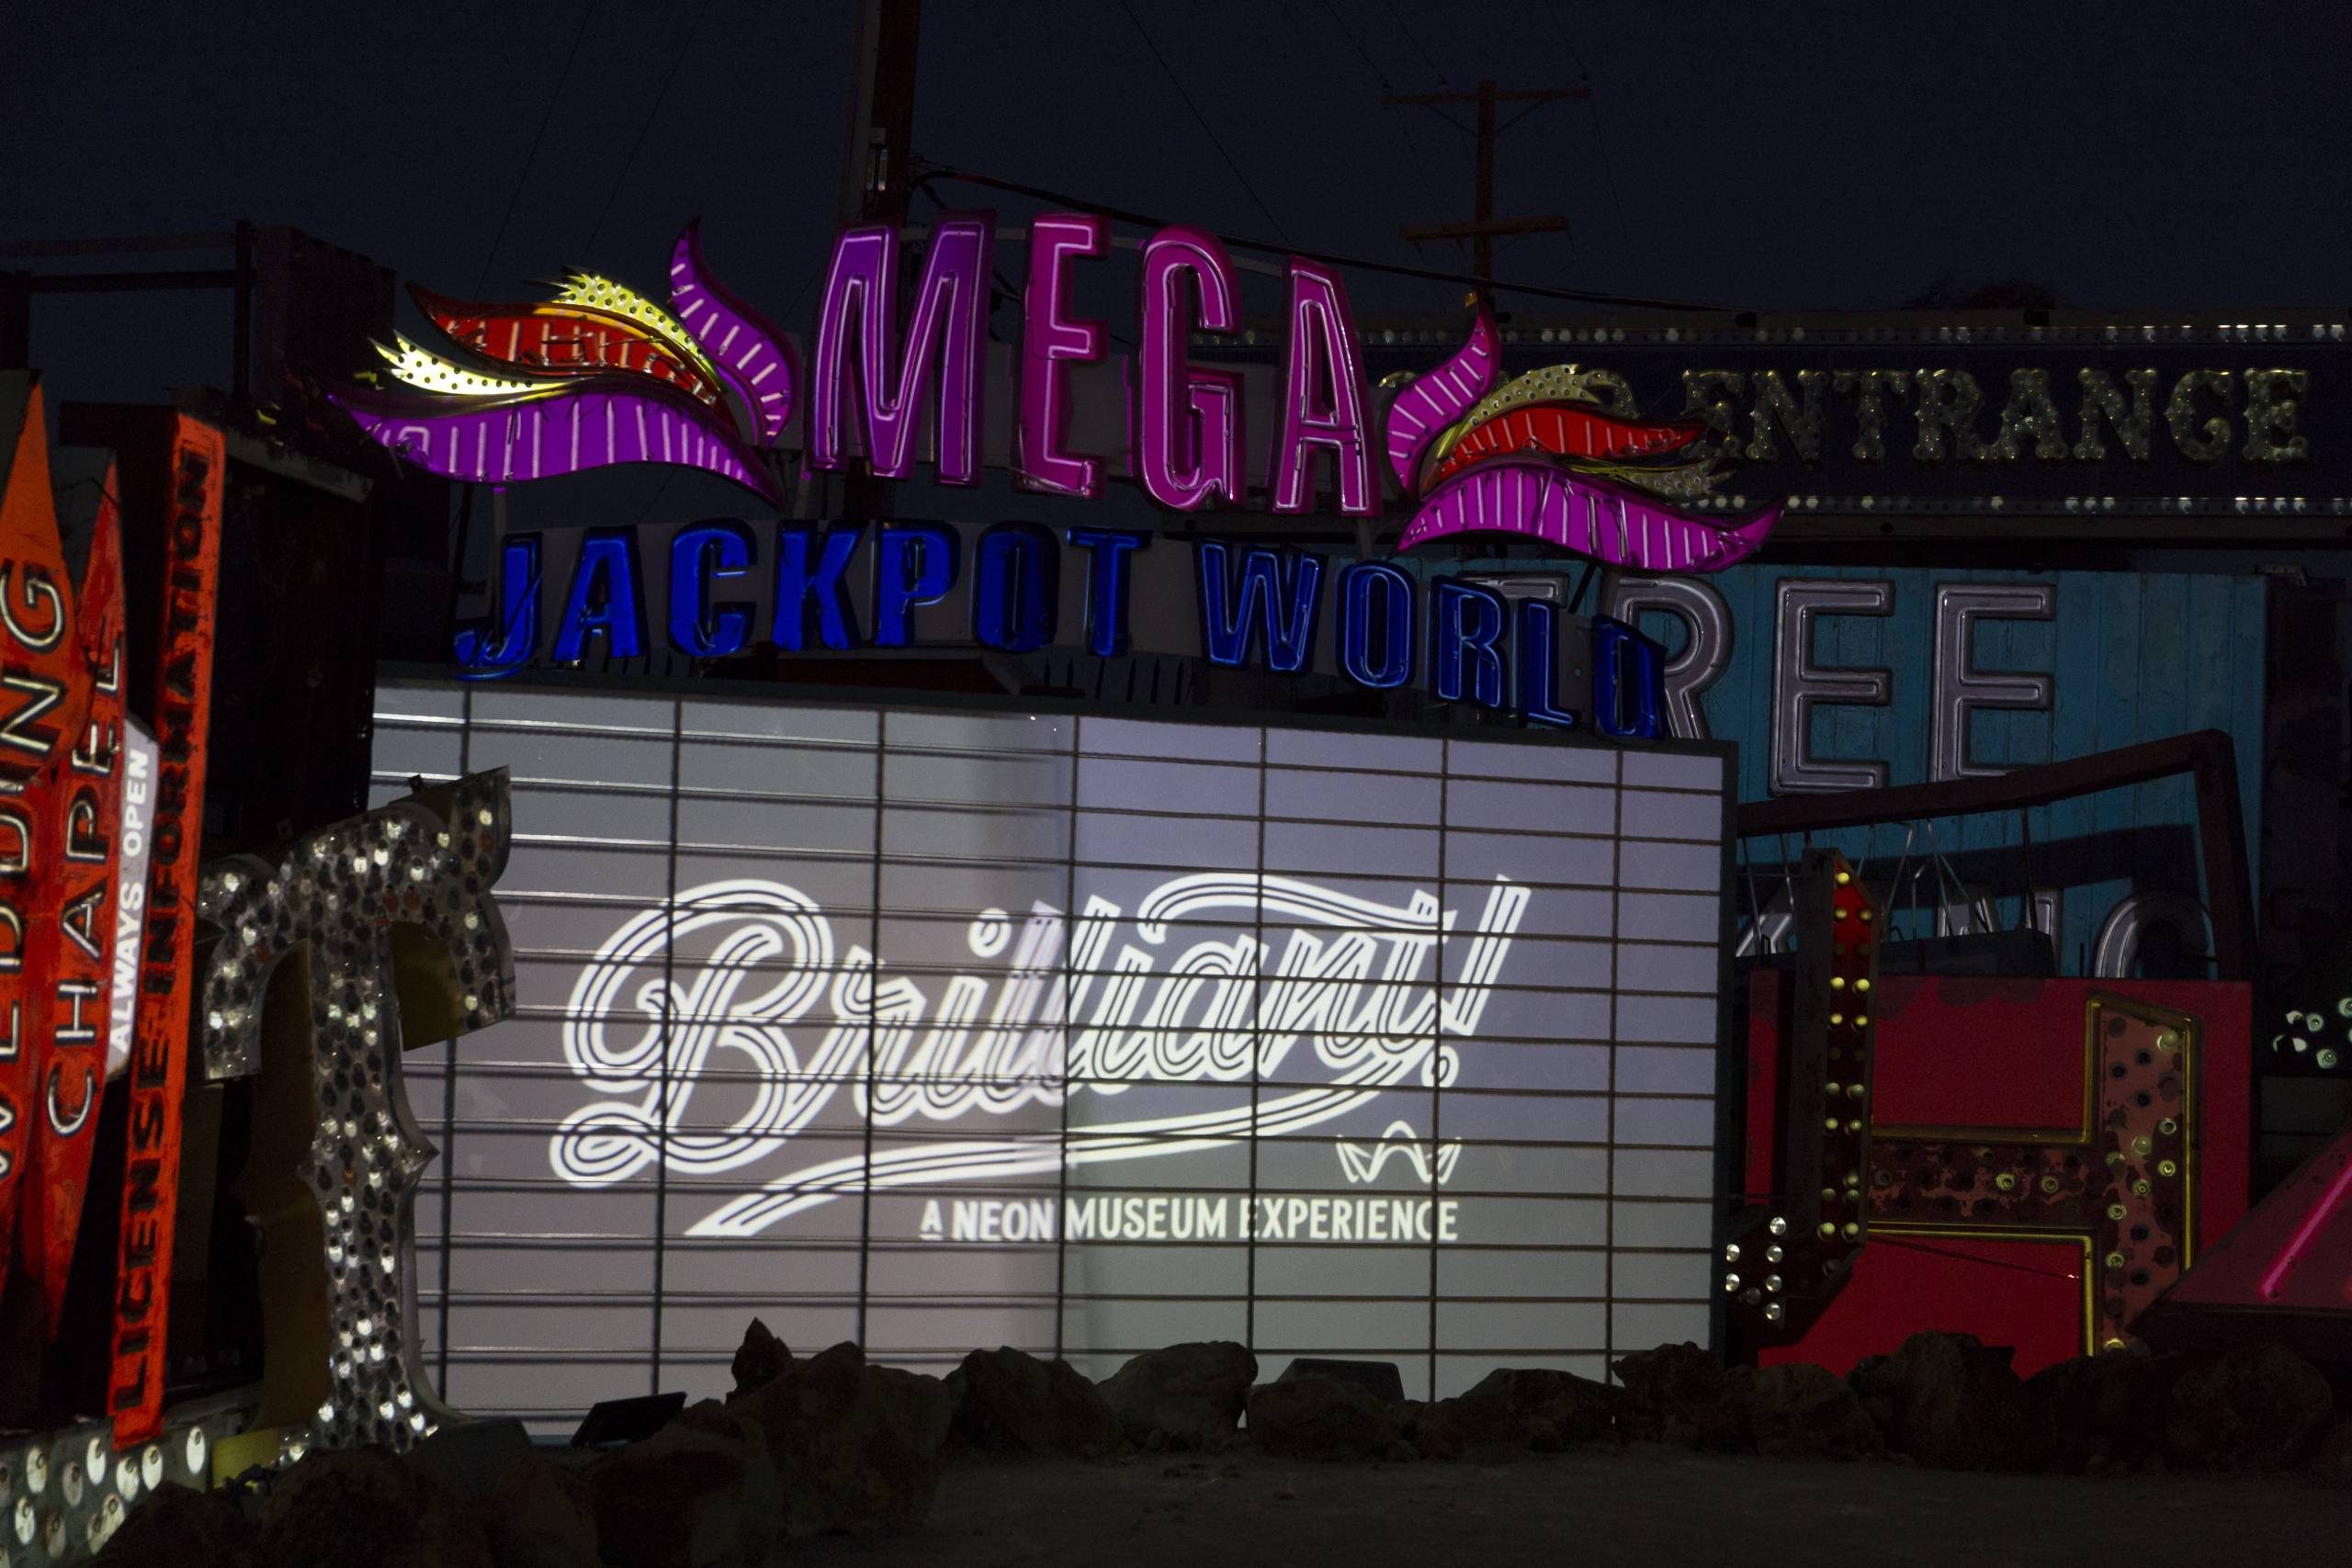 Brilliant! Jackpot show at The Neon Museum's North Gallery.